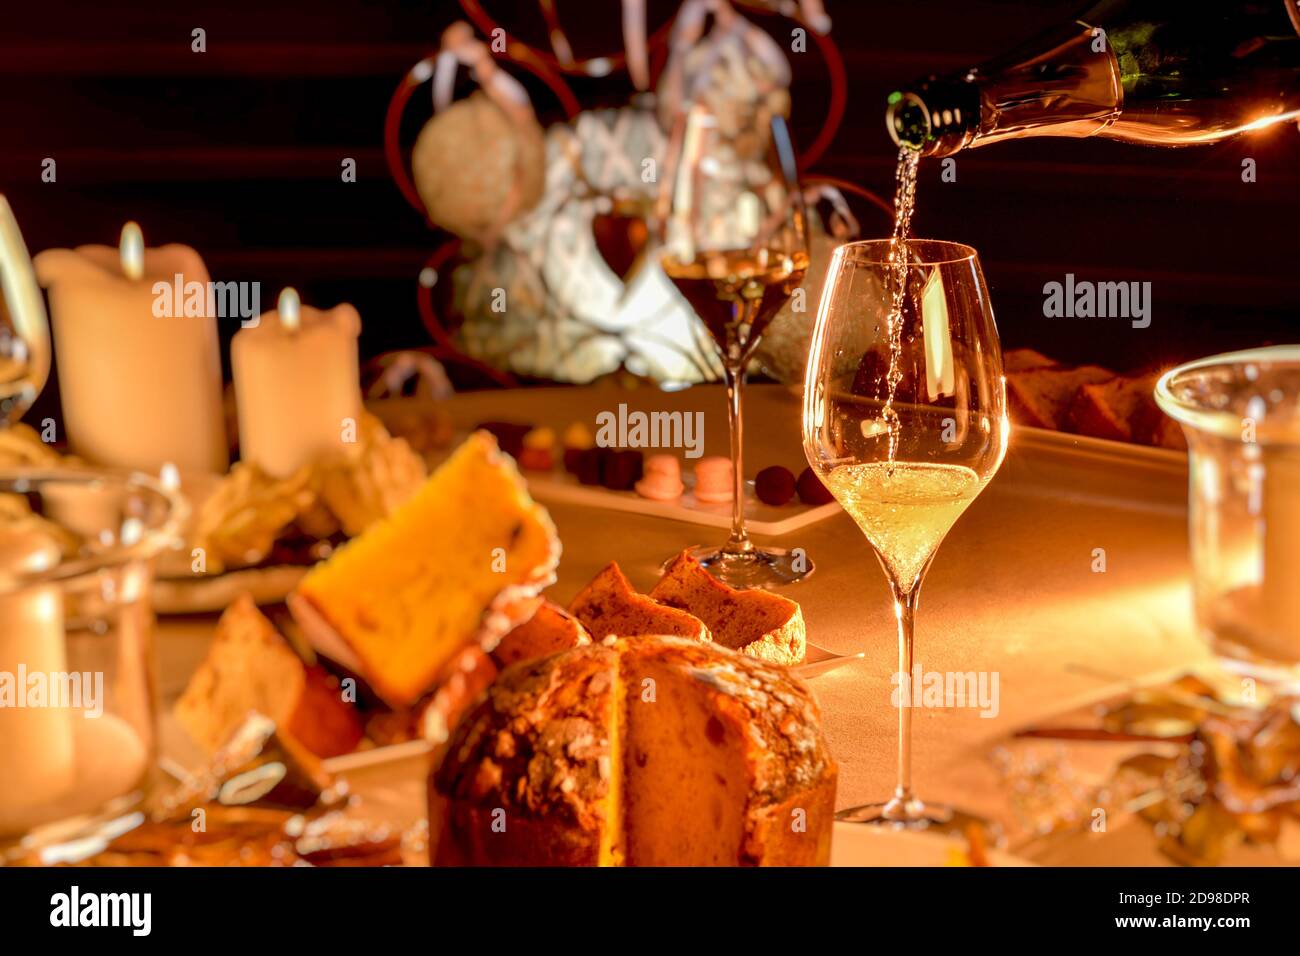 champagne is poured into glass on table set in Christmas style with blurred panettone and candles, warm mood light Stock Photo